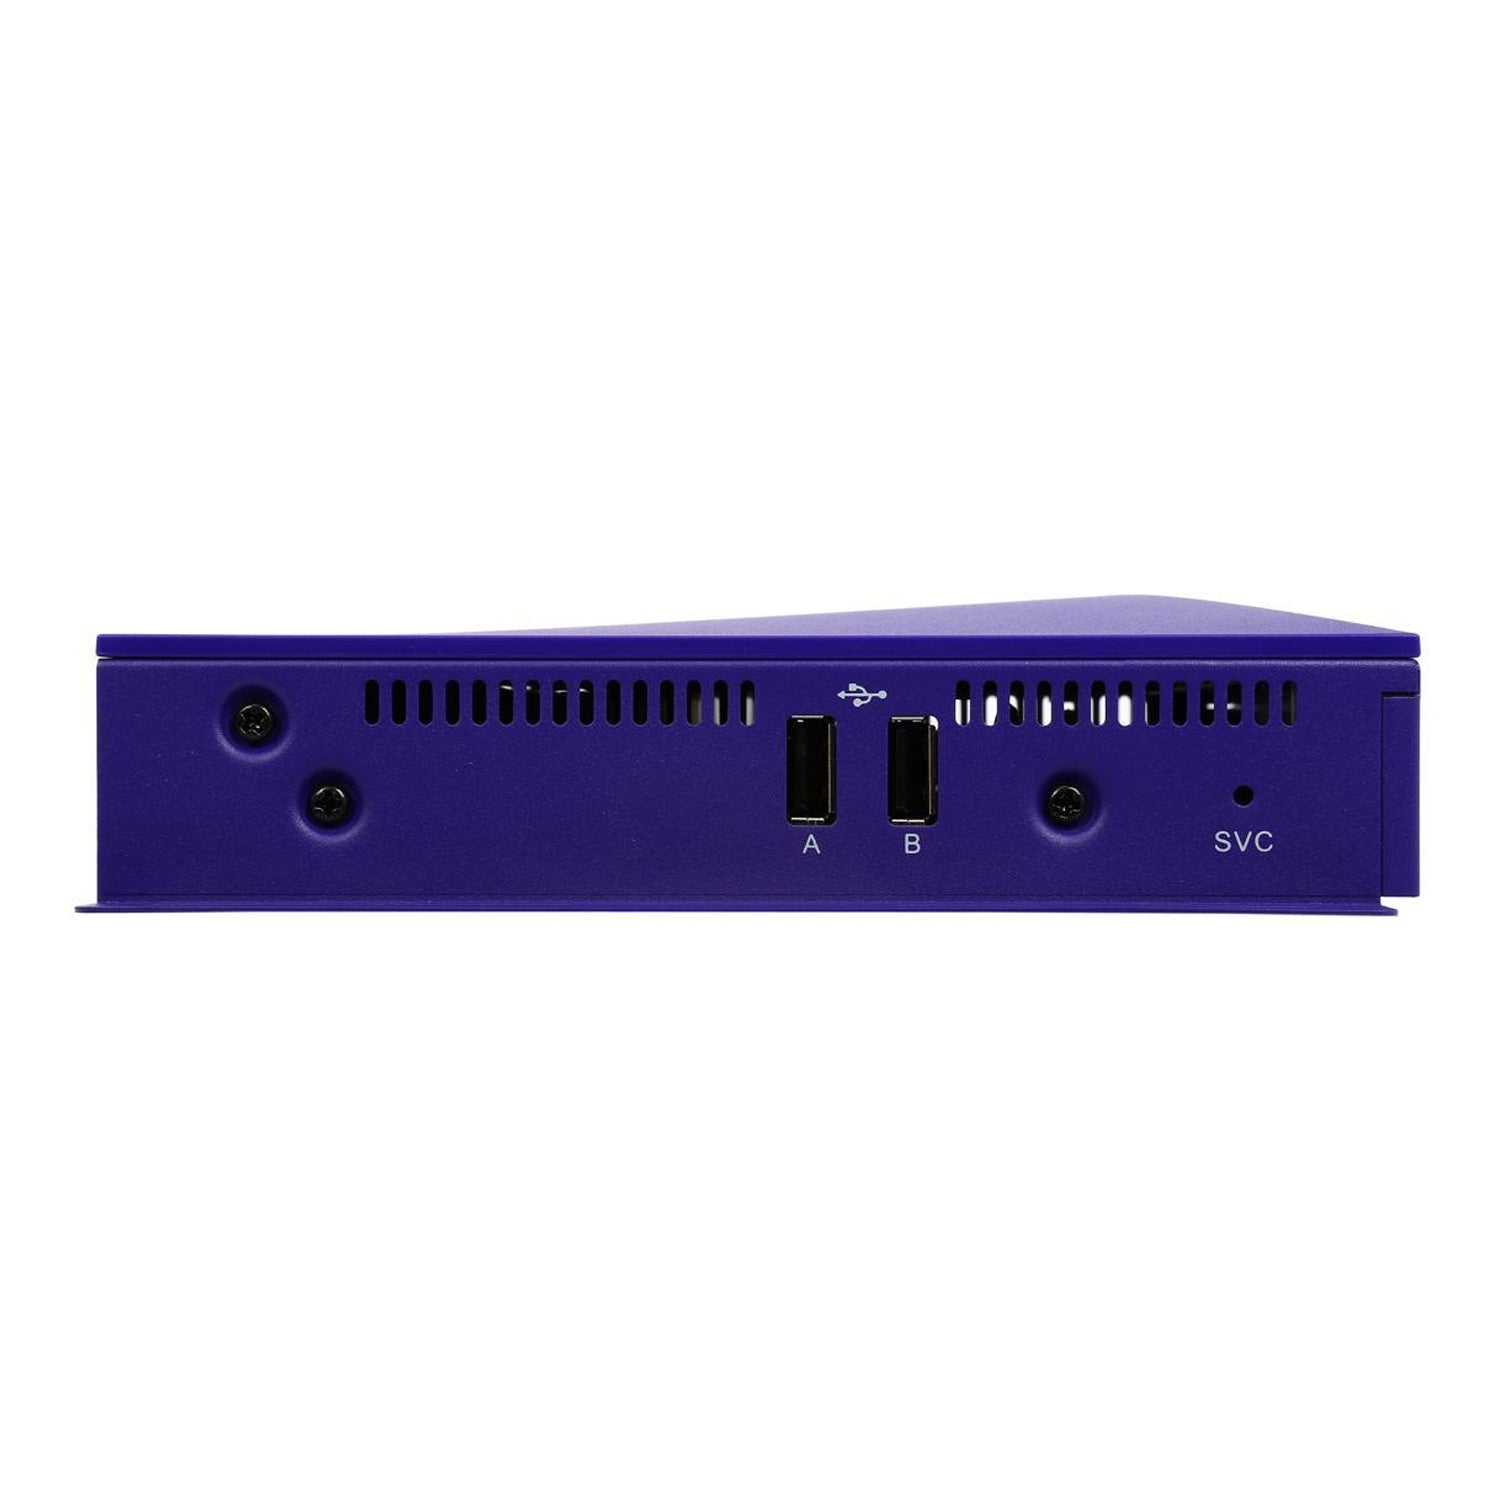 BrightSign XD1132 Networked Interactive Media Player with Live HDTV